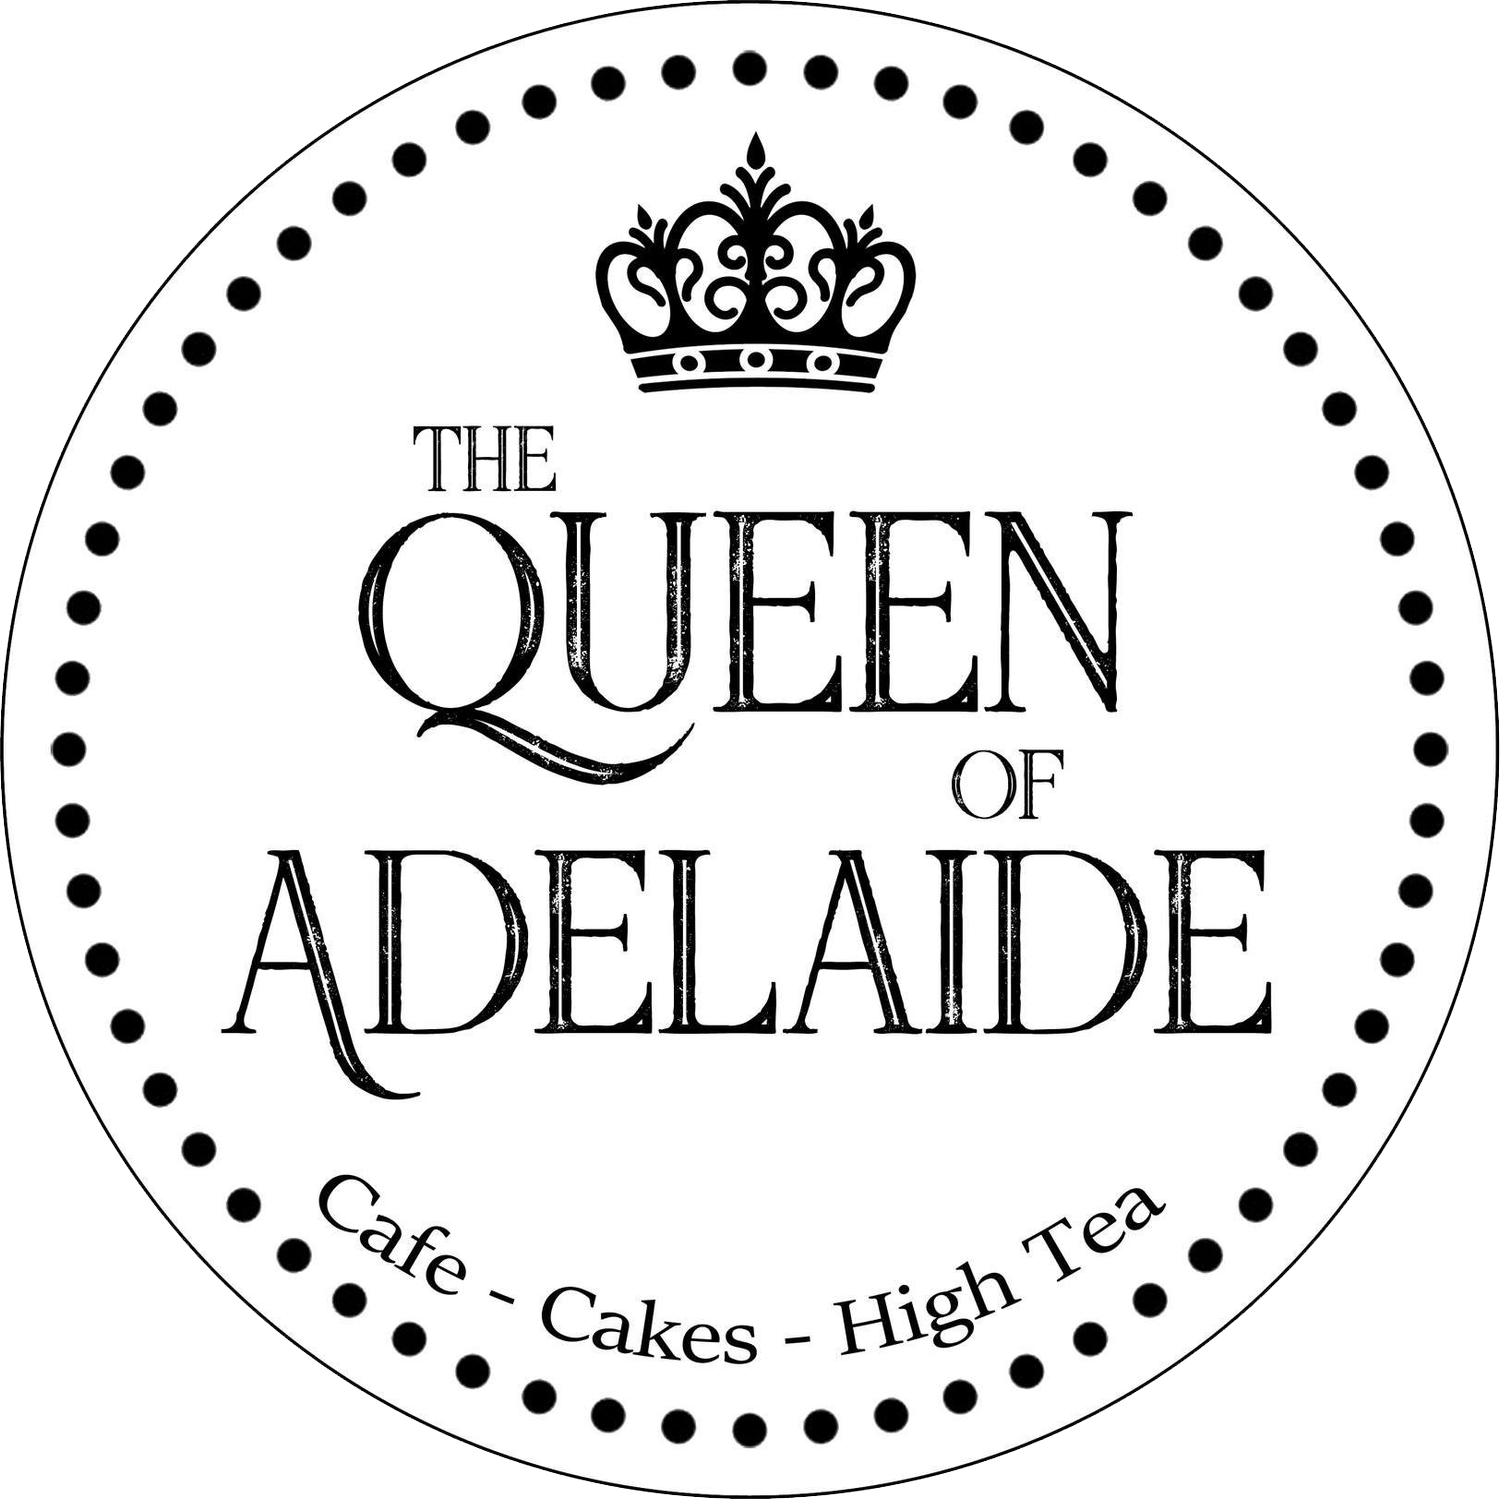 The Queen of Adelaide